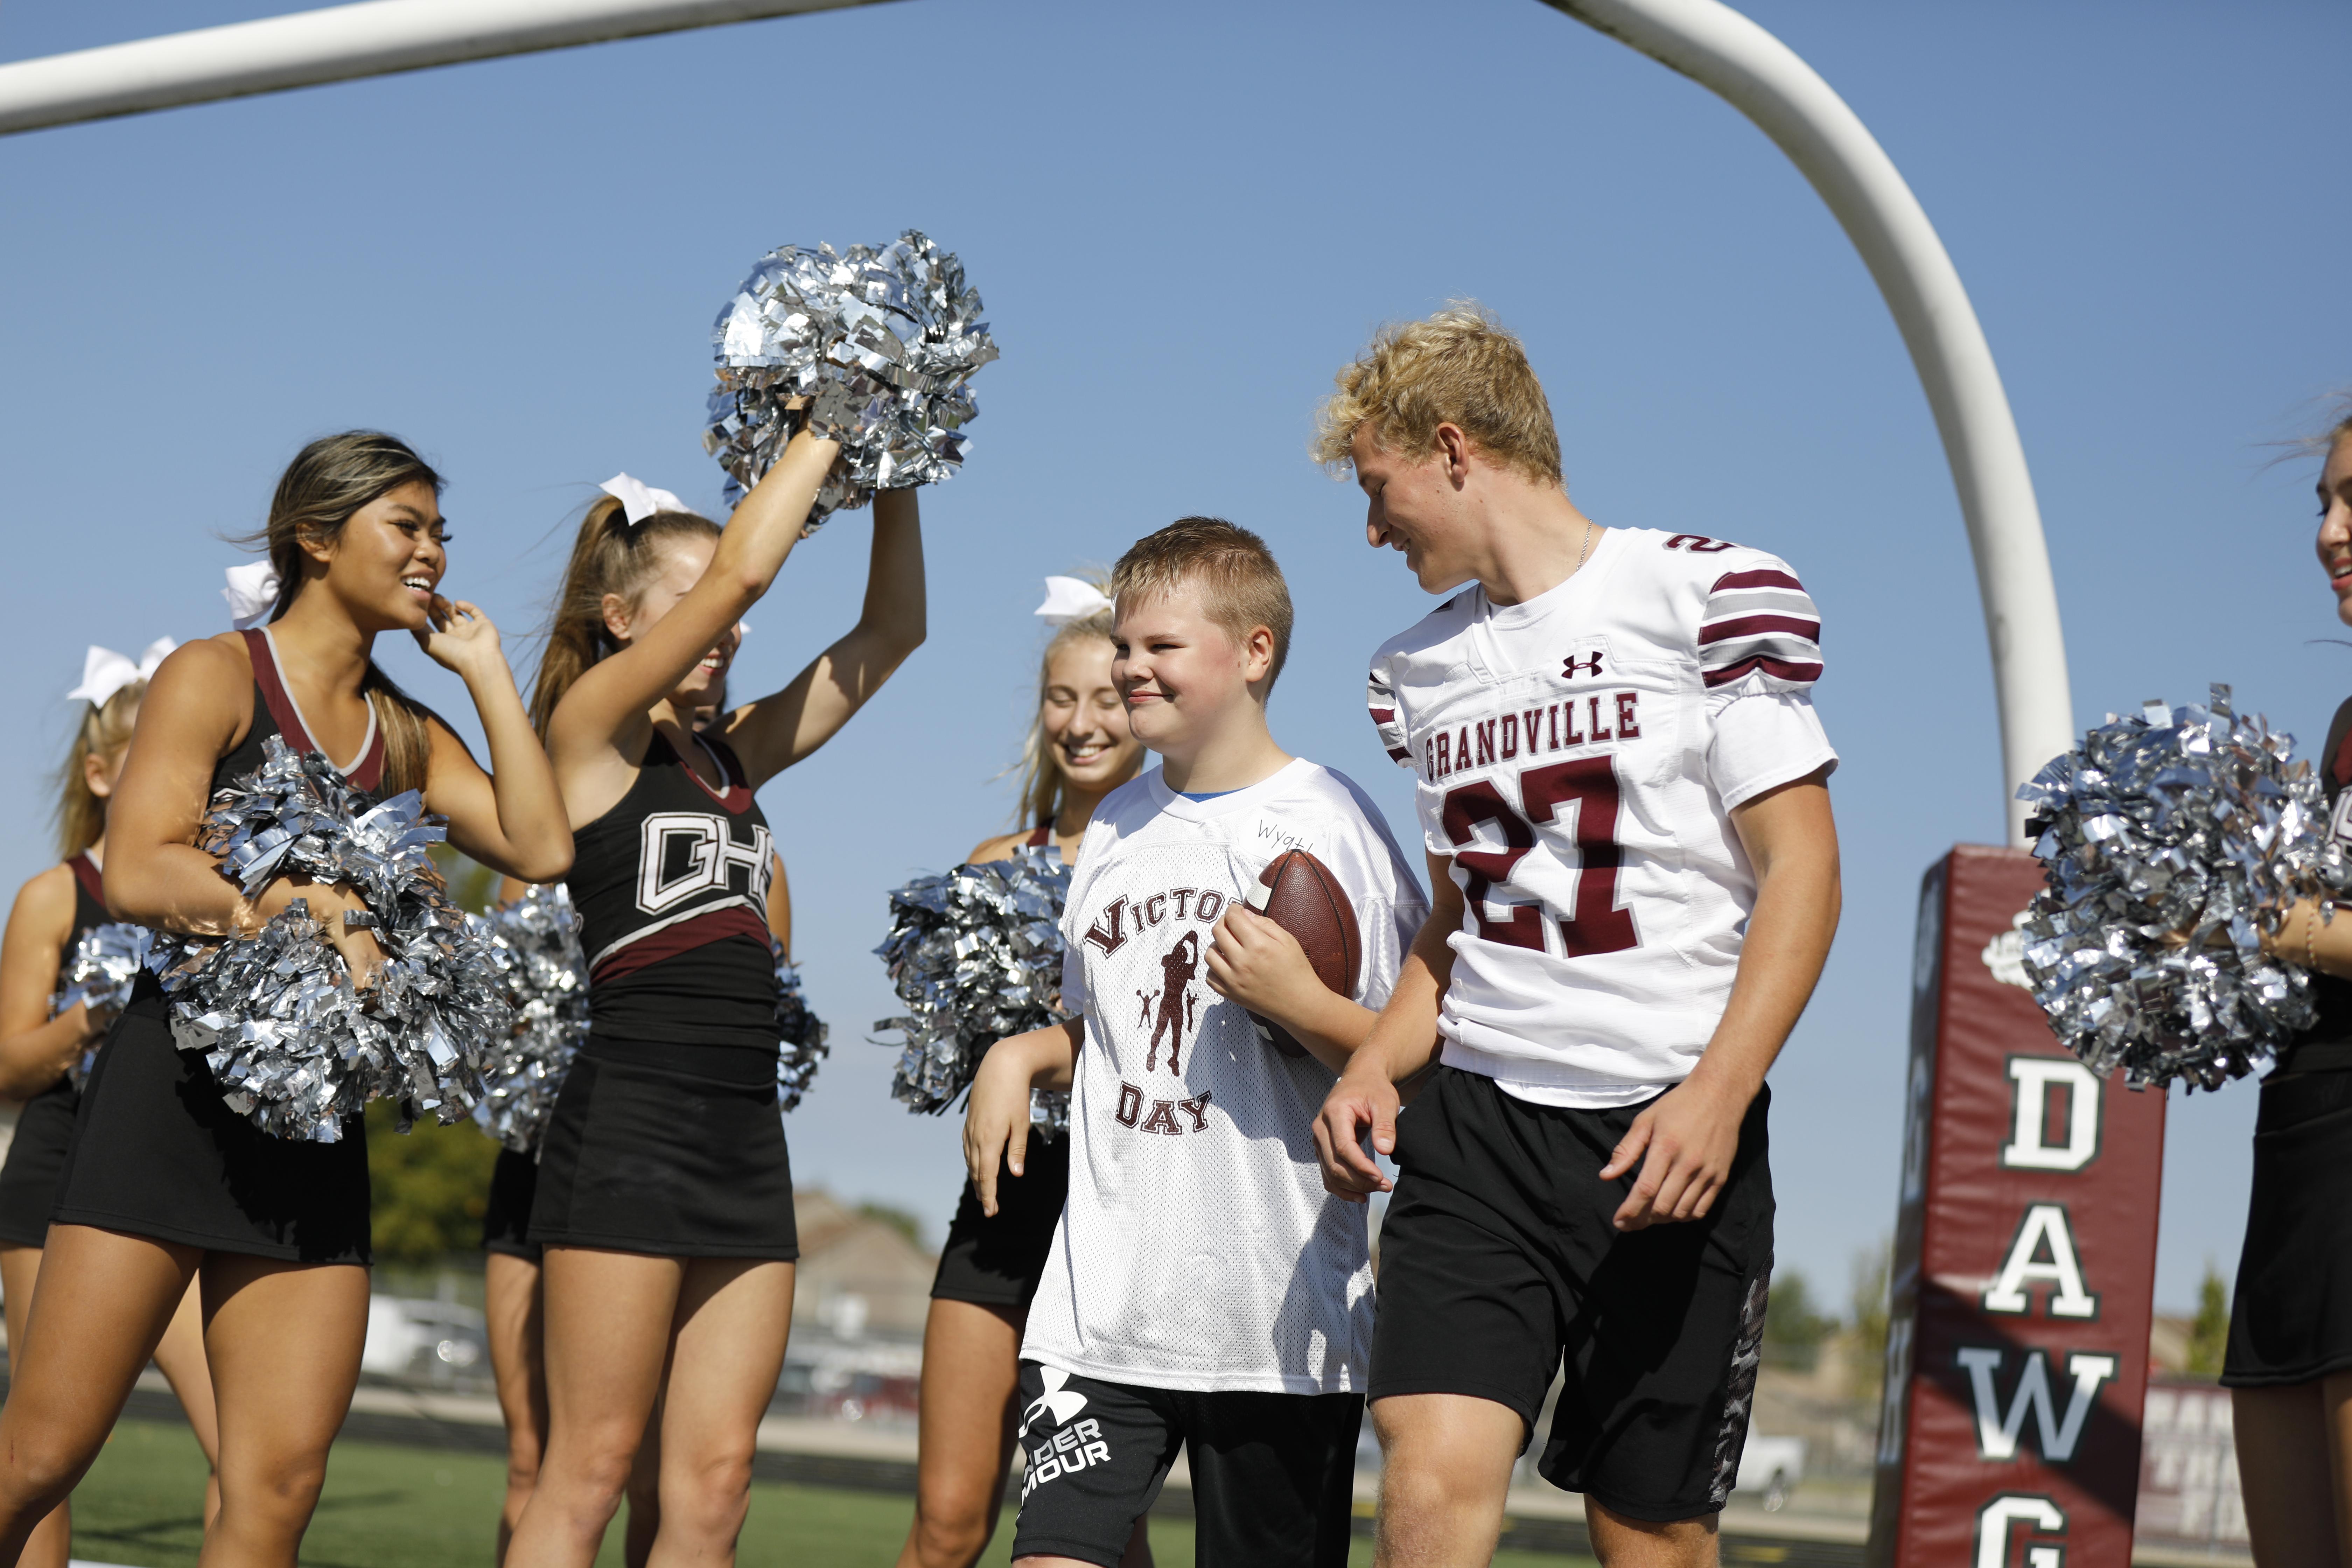 Victory Day participant smiles with cheerleaders